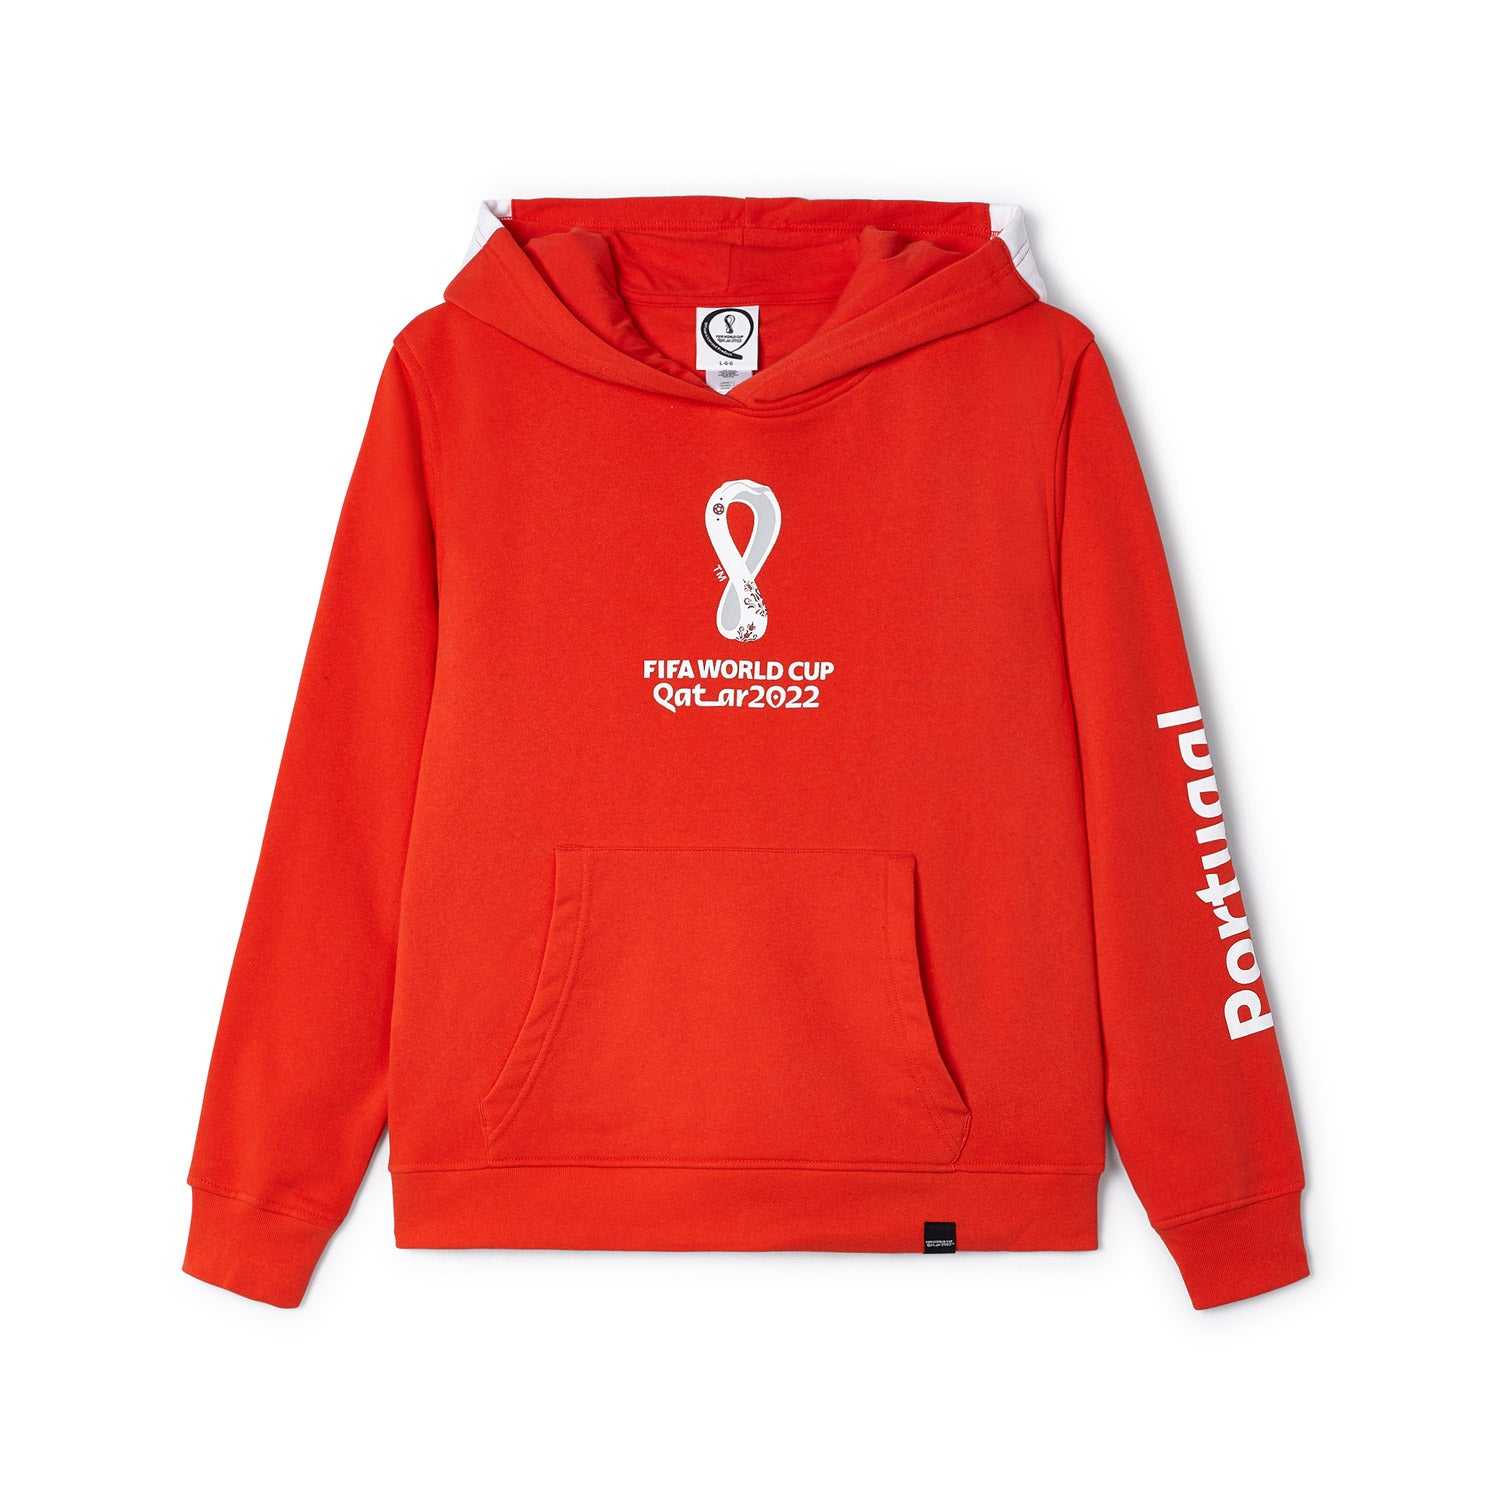 2022 World Cup Portugal Red Hoodie - Womens